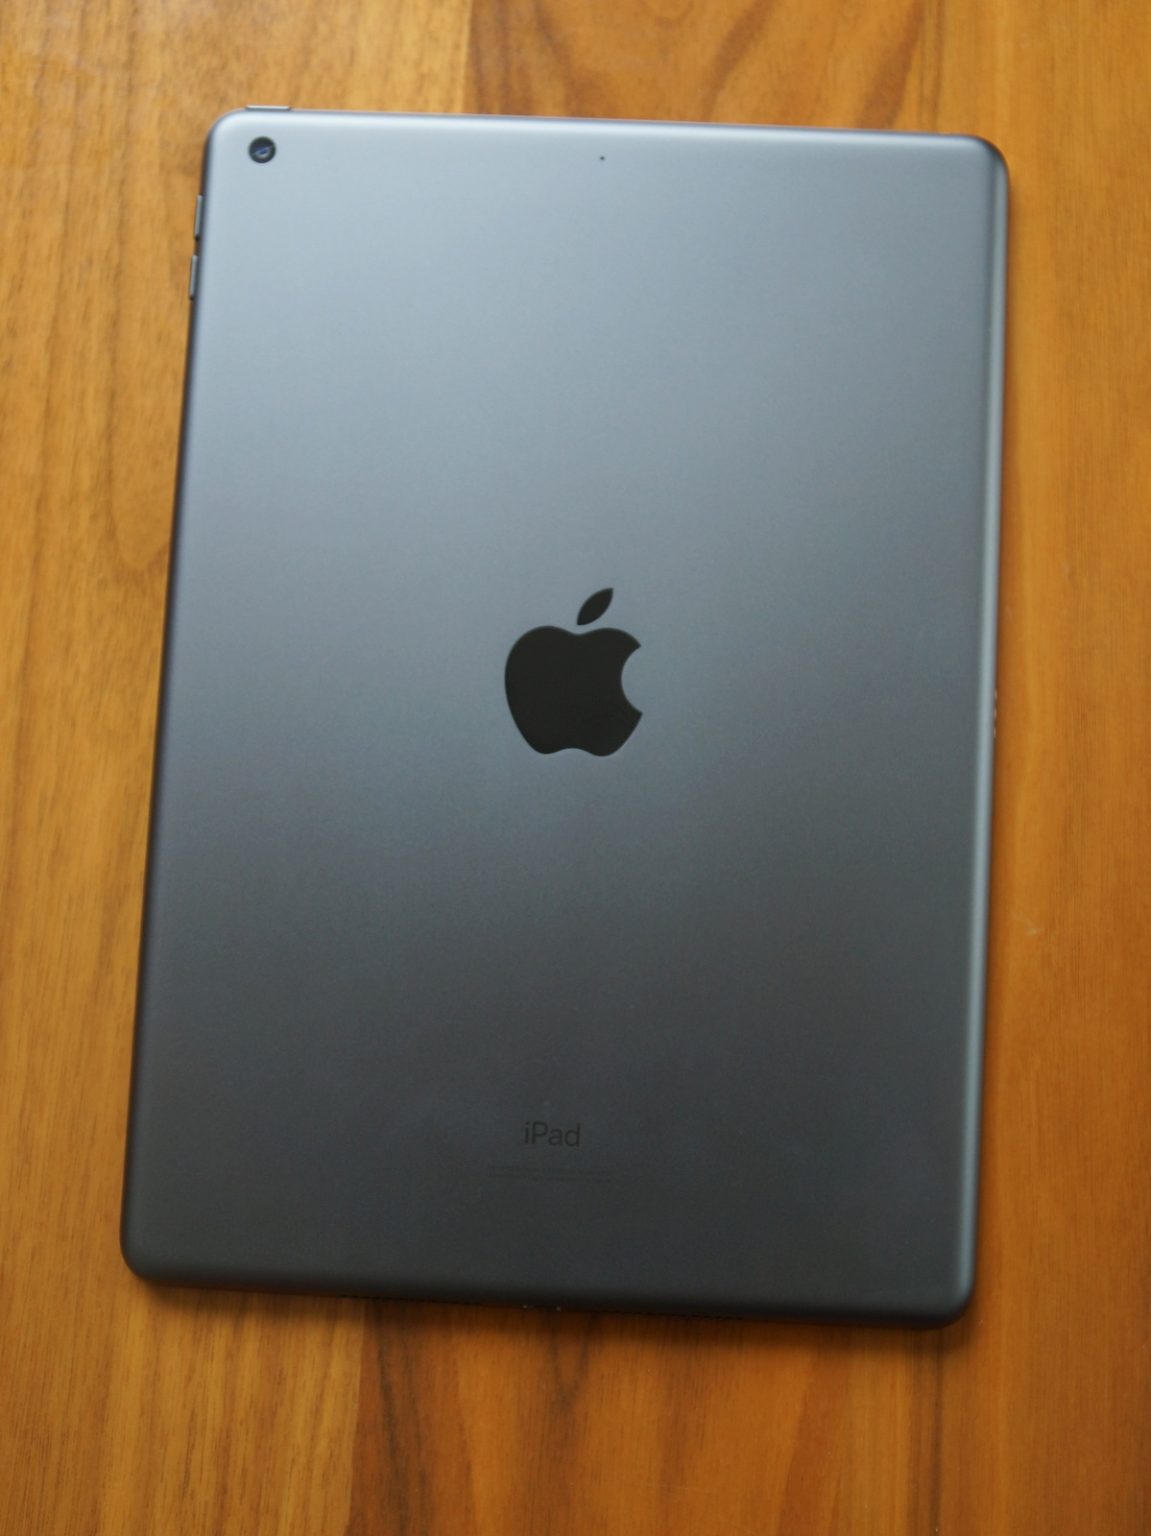 Apple iPad 10.2 inch 8th Gen 32GB Wi-Fi (Excellent) New Battery, Case, Screen Protector & Shipping